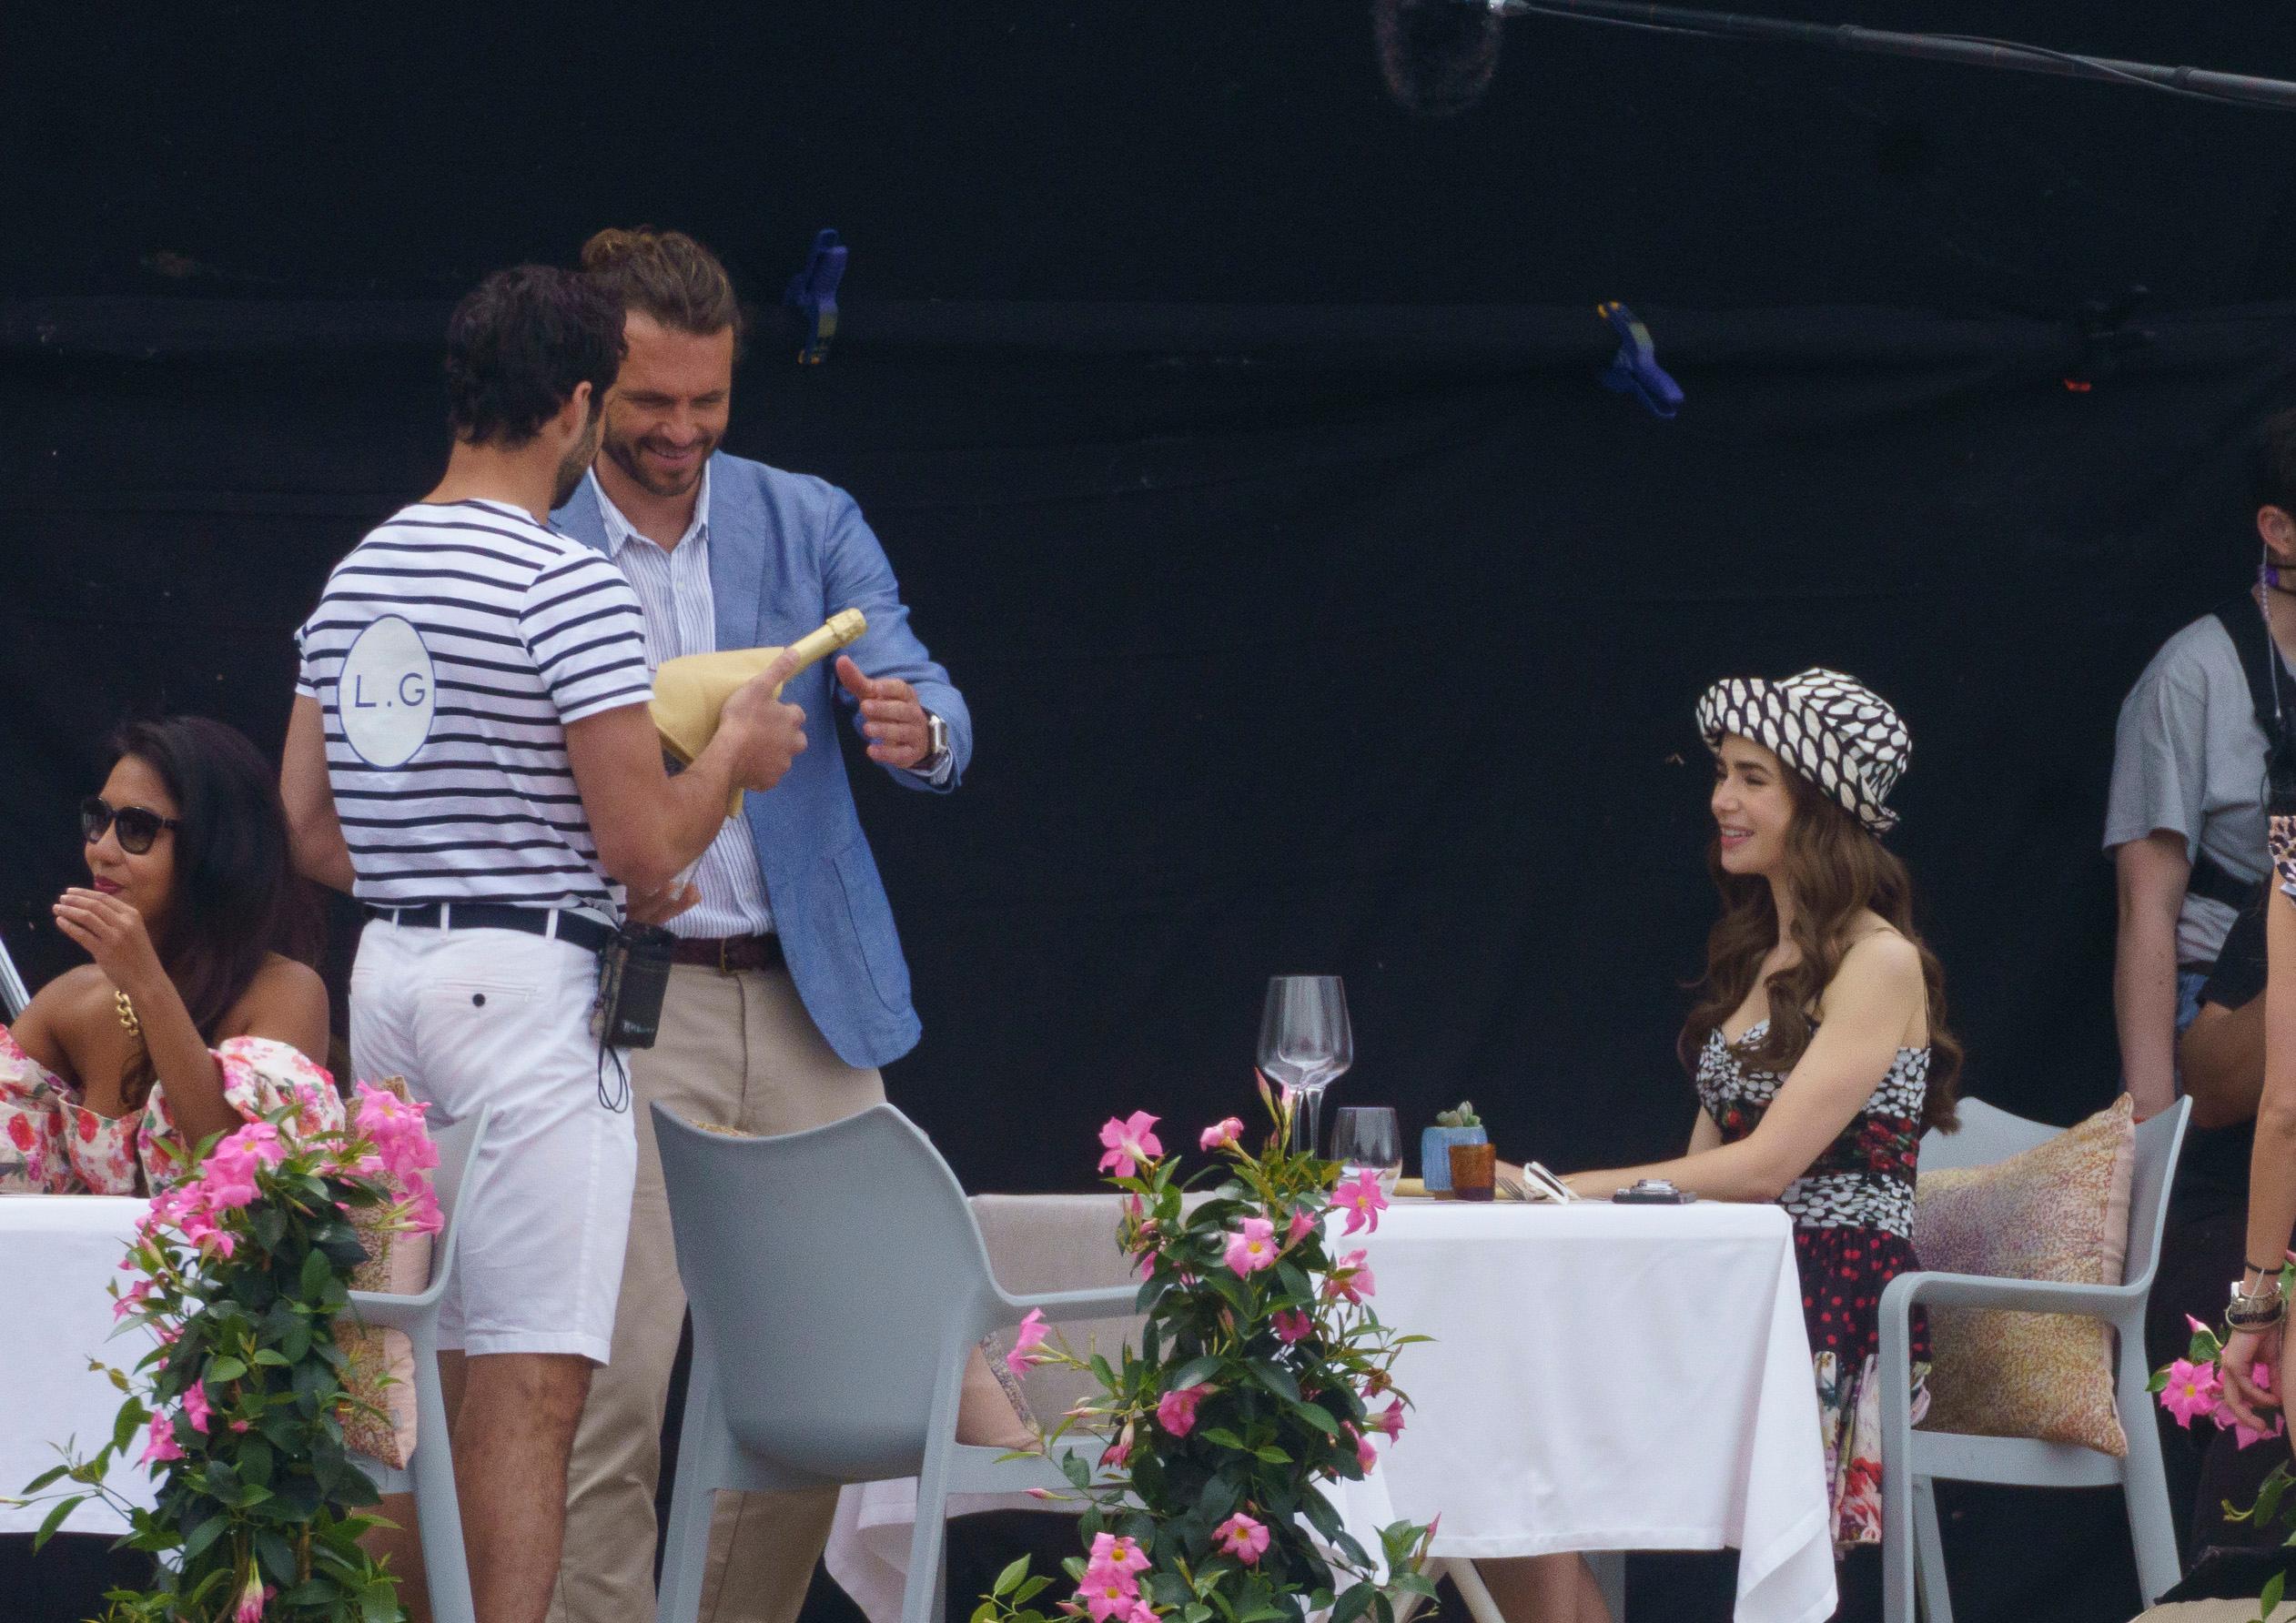 Lily Collins begins filming series 2 of Emily In Paris at the Paloma beach in St-Jean Cap Ferrat in South of France